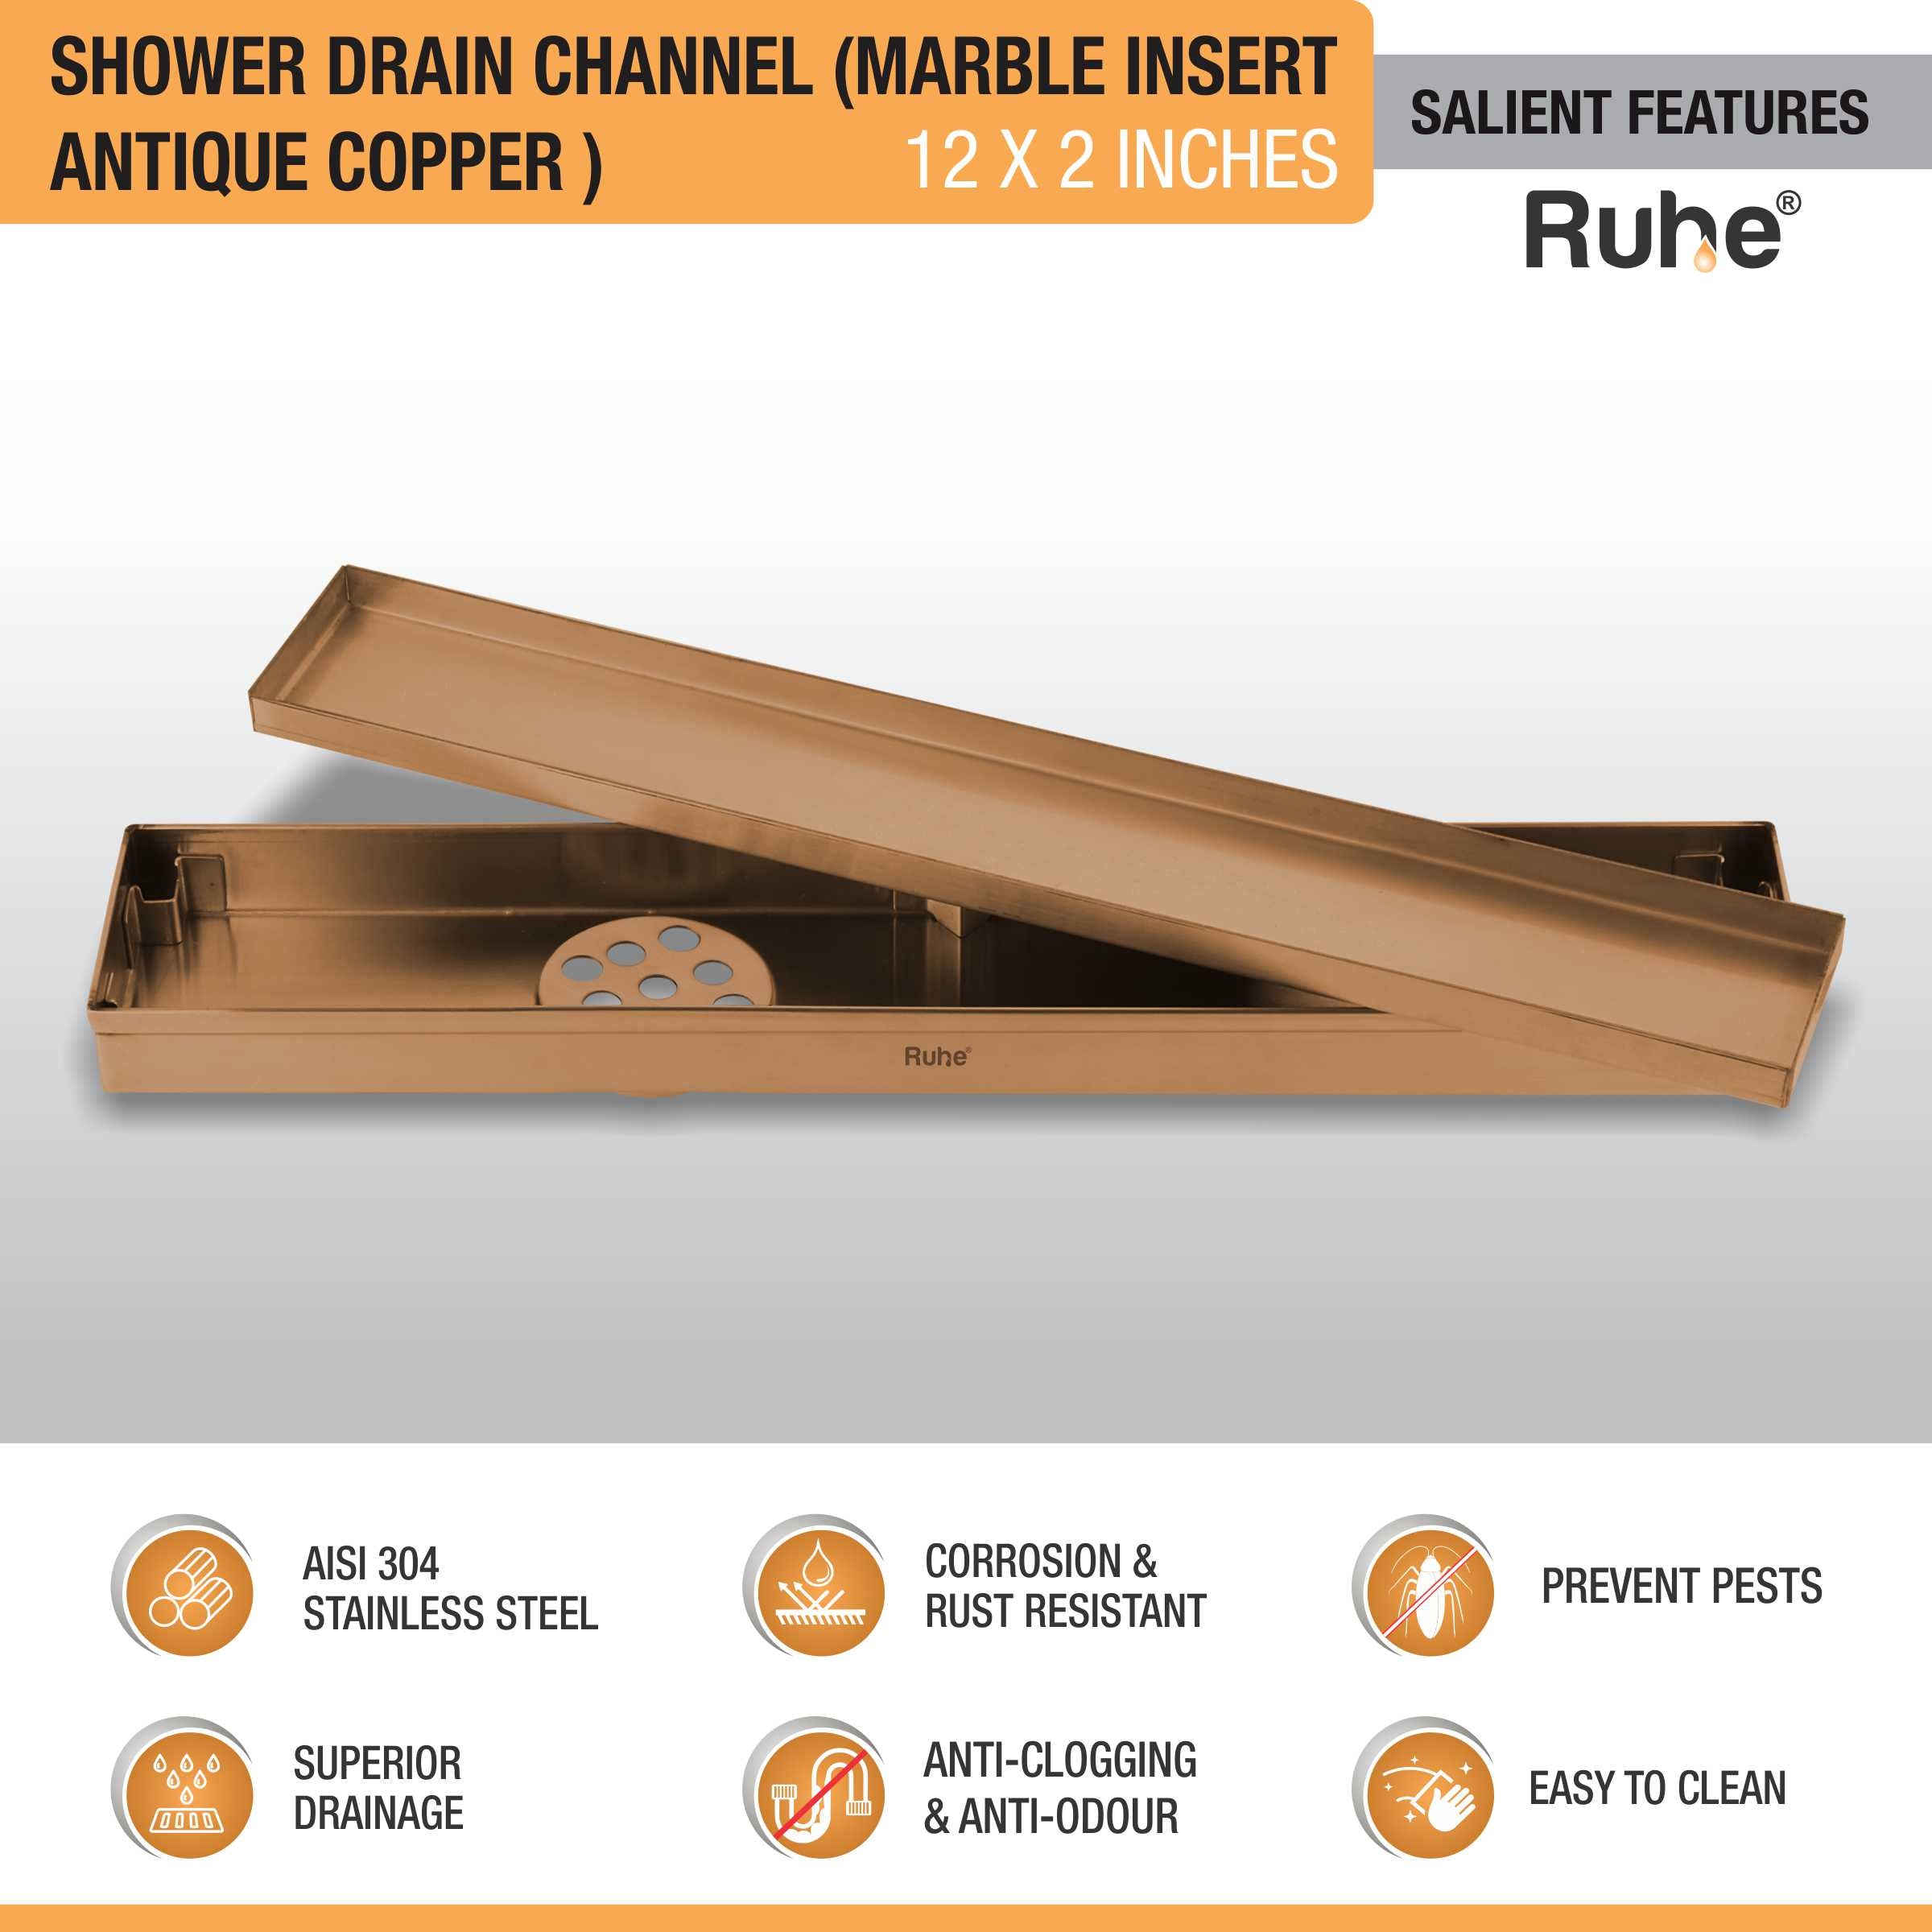 Marble Insert Shower Drain Channel (12 x 2 Inches) ANTIQUE COPPER features